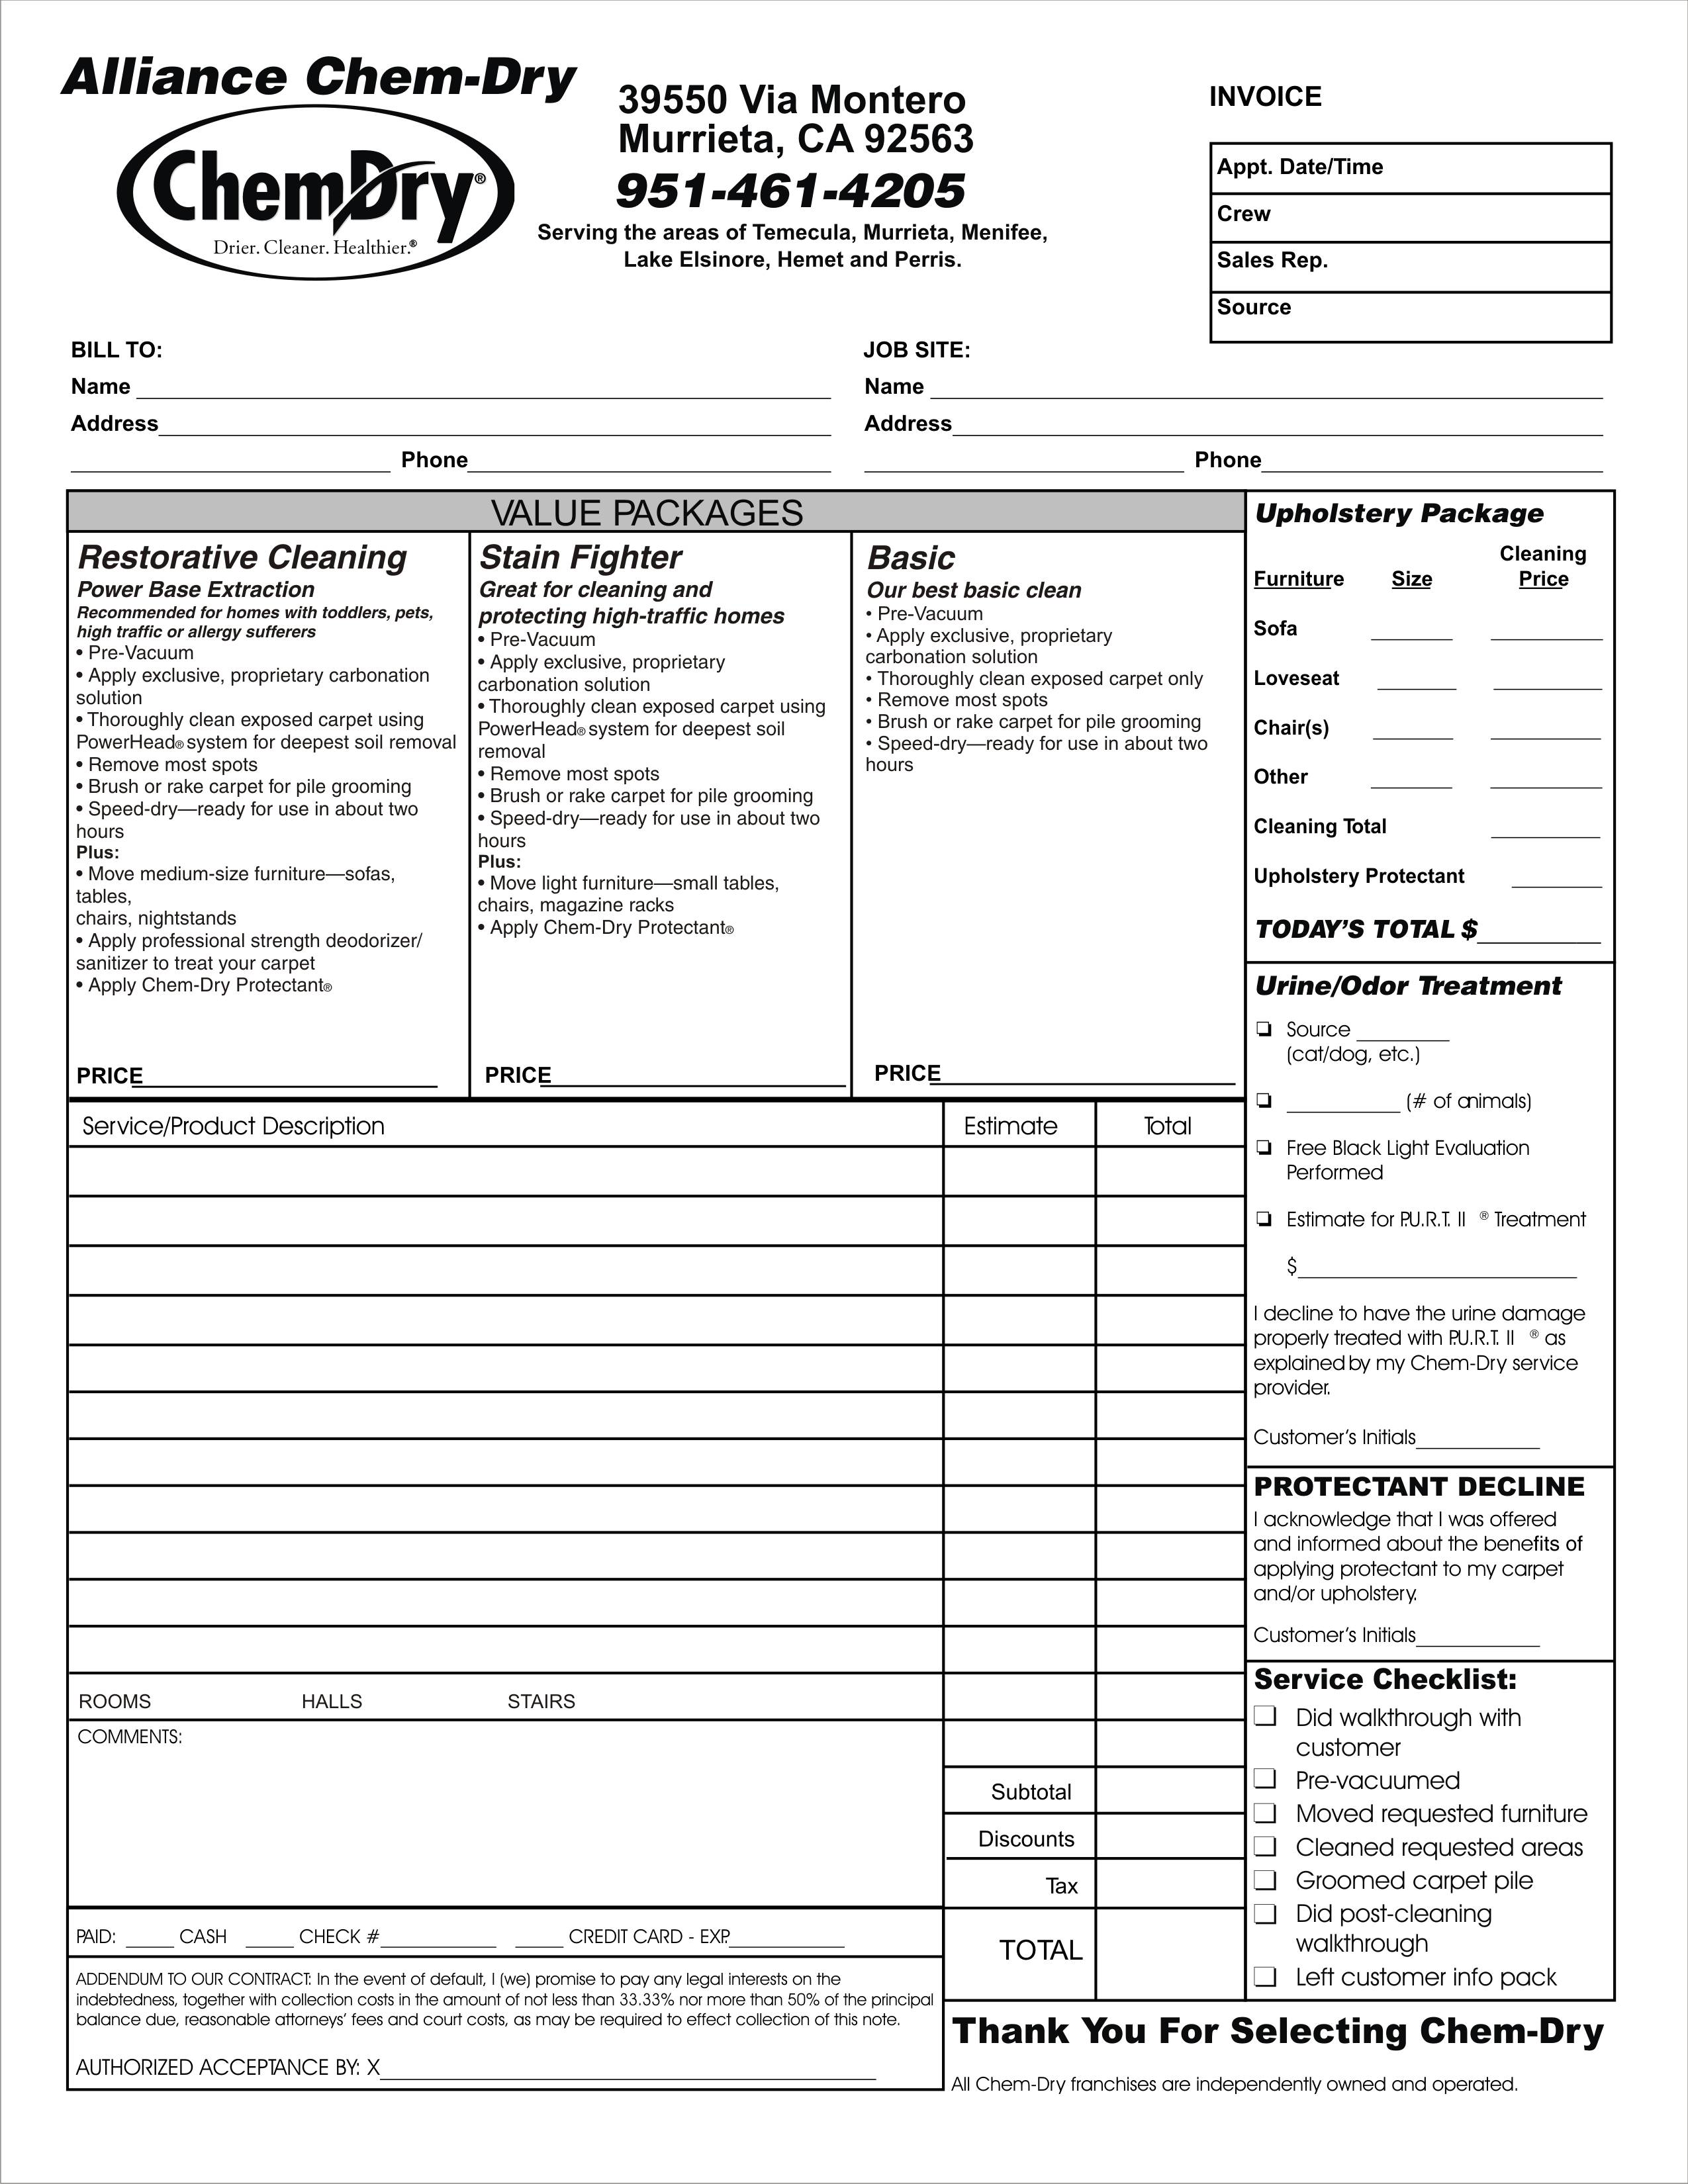 Microsoft Excel Invoice Template Free